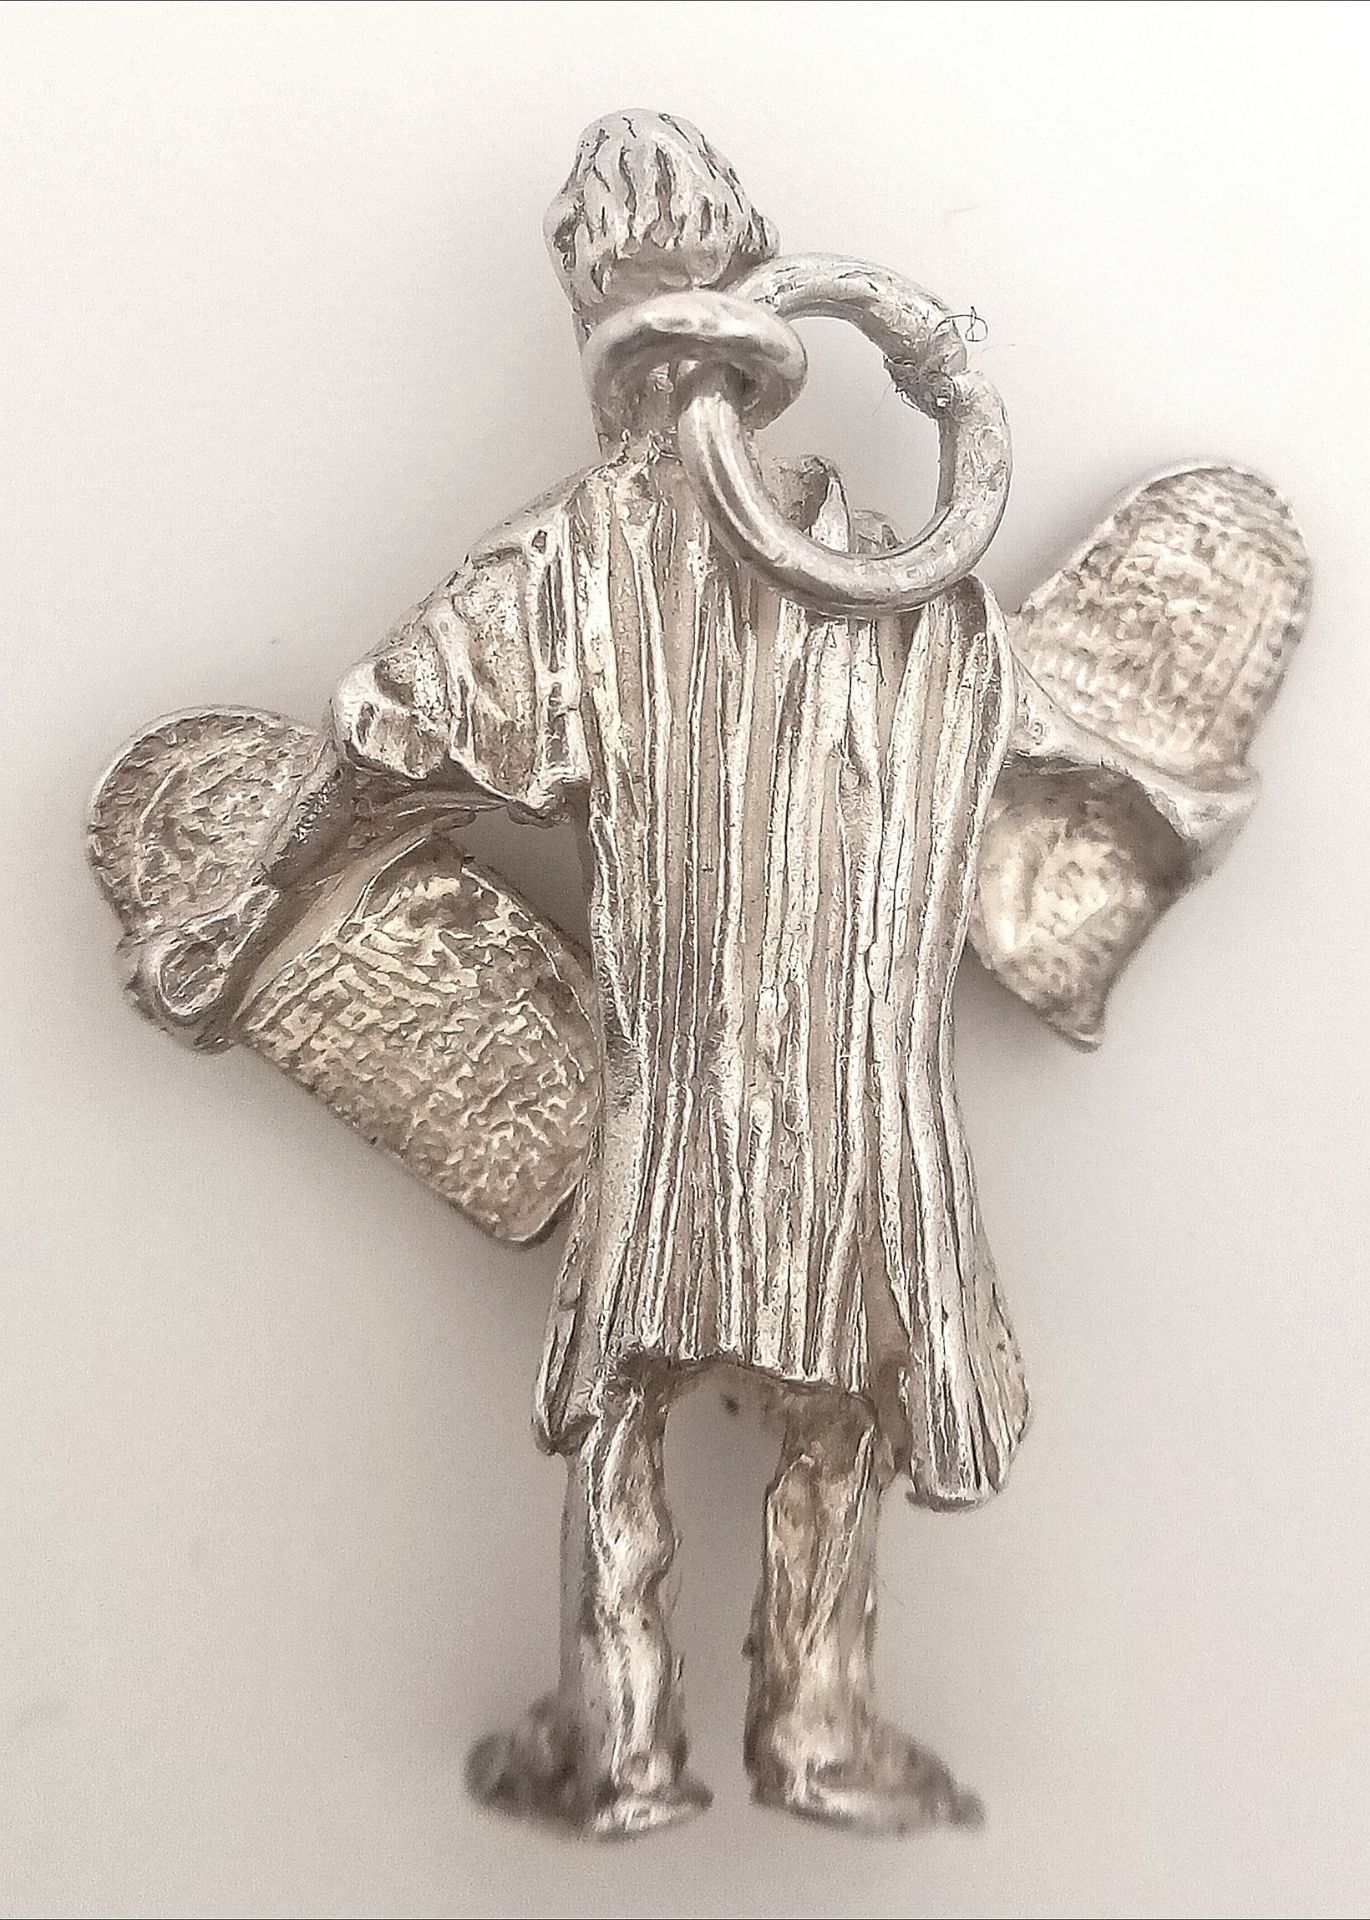 A STERLING SILVER MOSES WITH THE 10 COMMANDMENTS CHARM. 2.5cm length, 4g weight. Ref: SC 8113 - Image 3 of 4